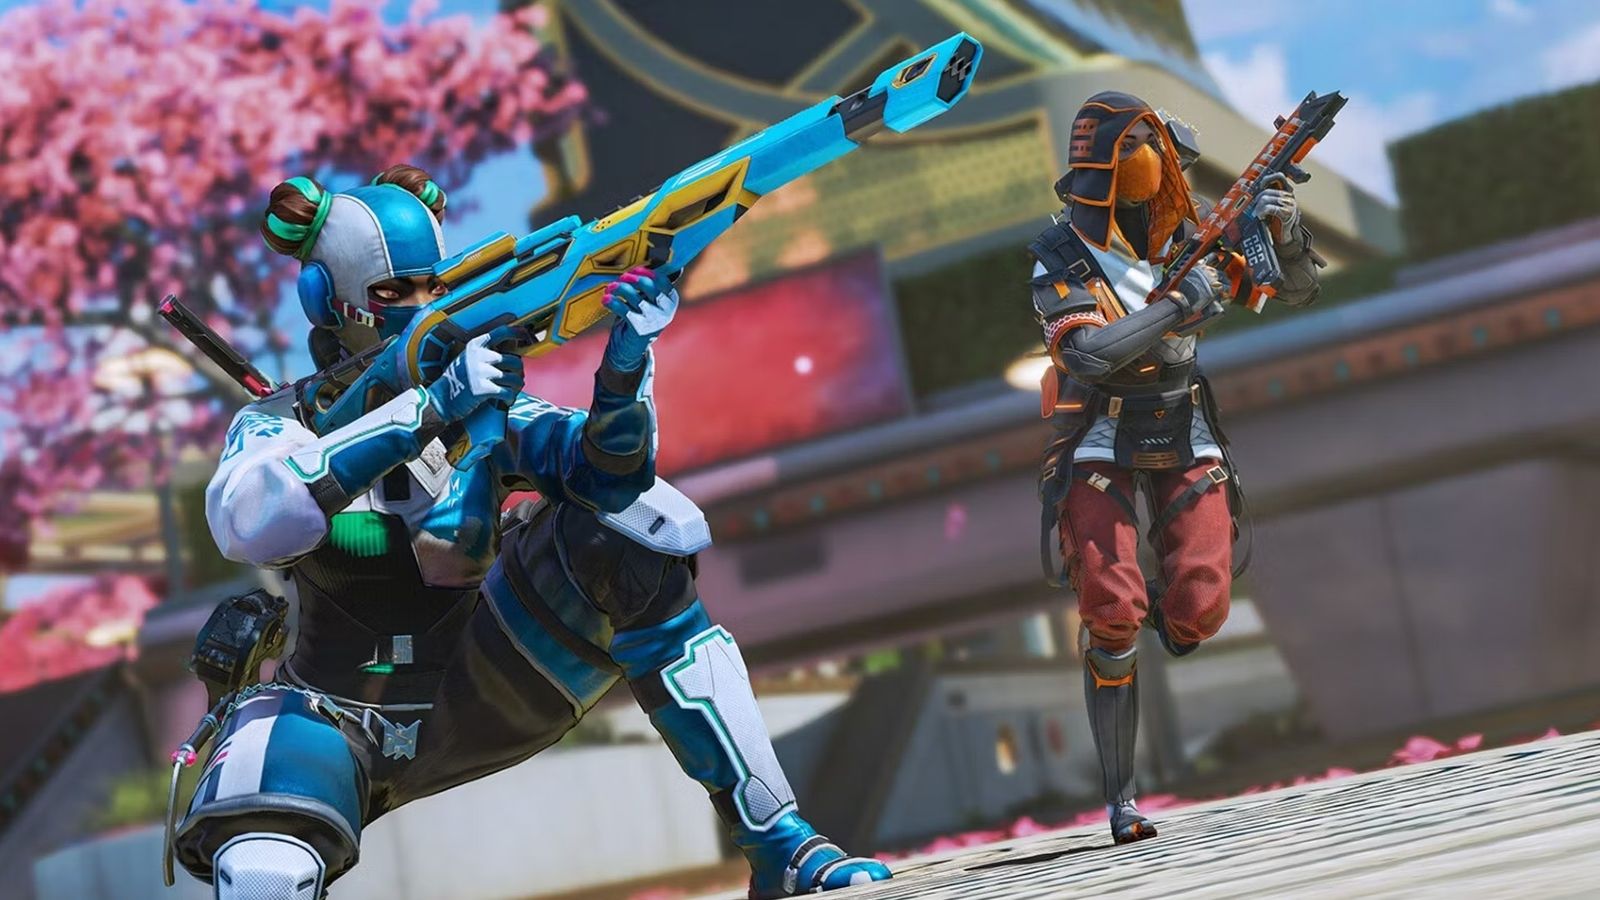 Apex Legends players holding and aiming guns